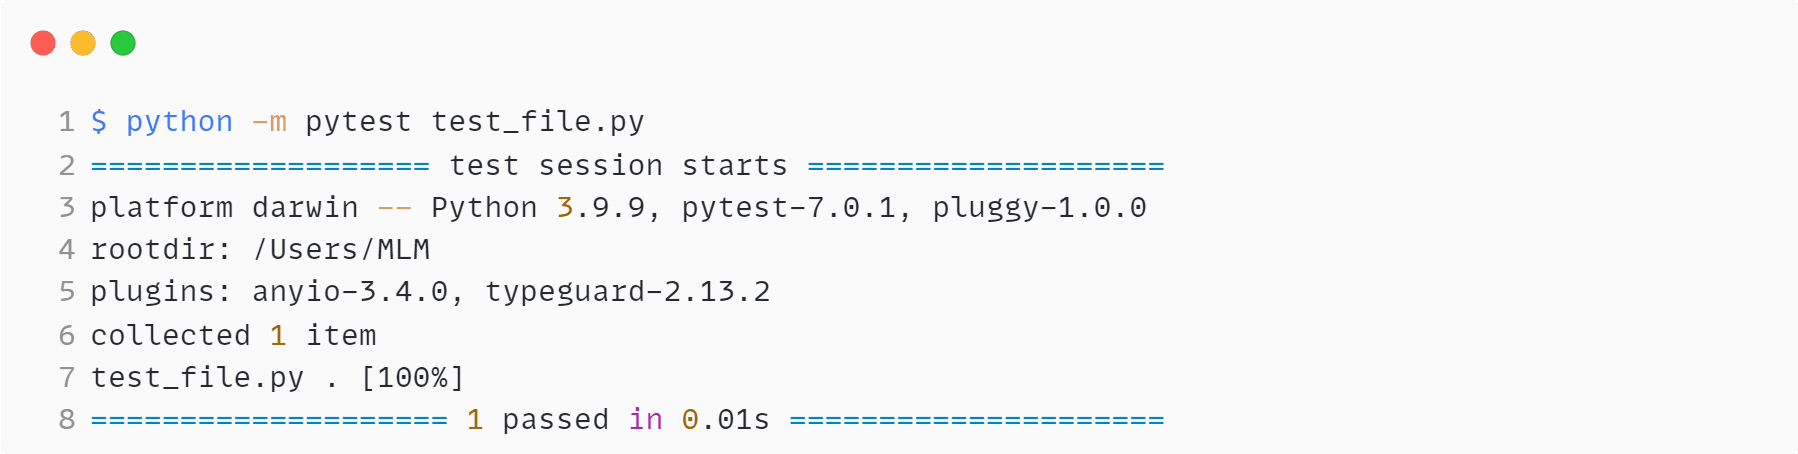 Pytest Example From The Book